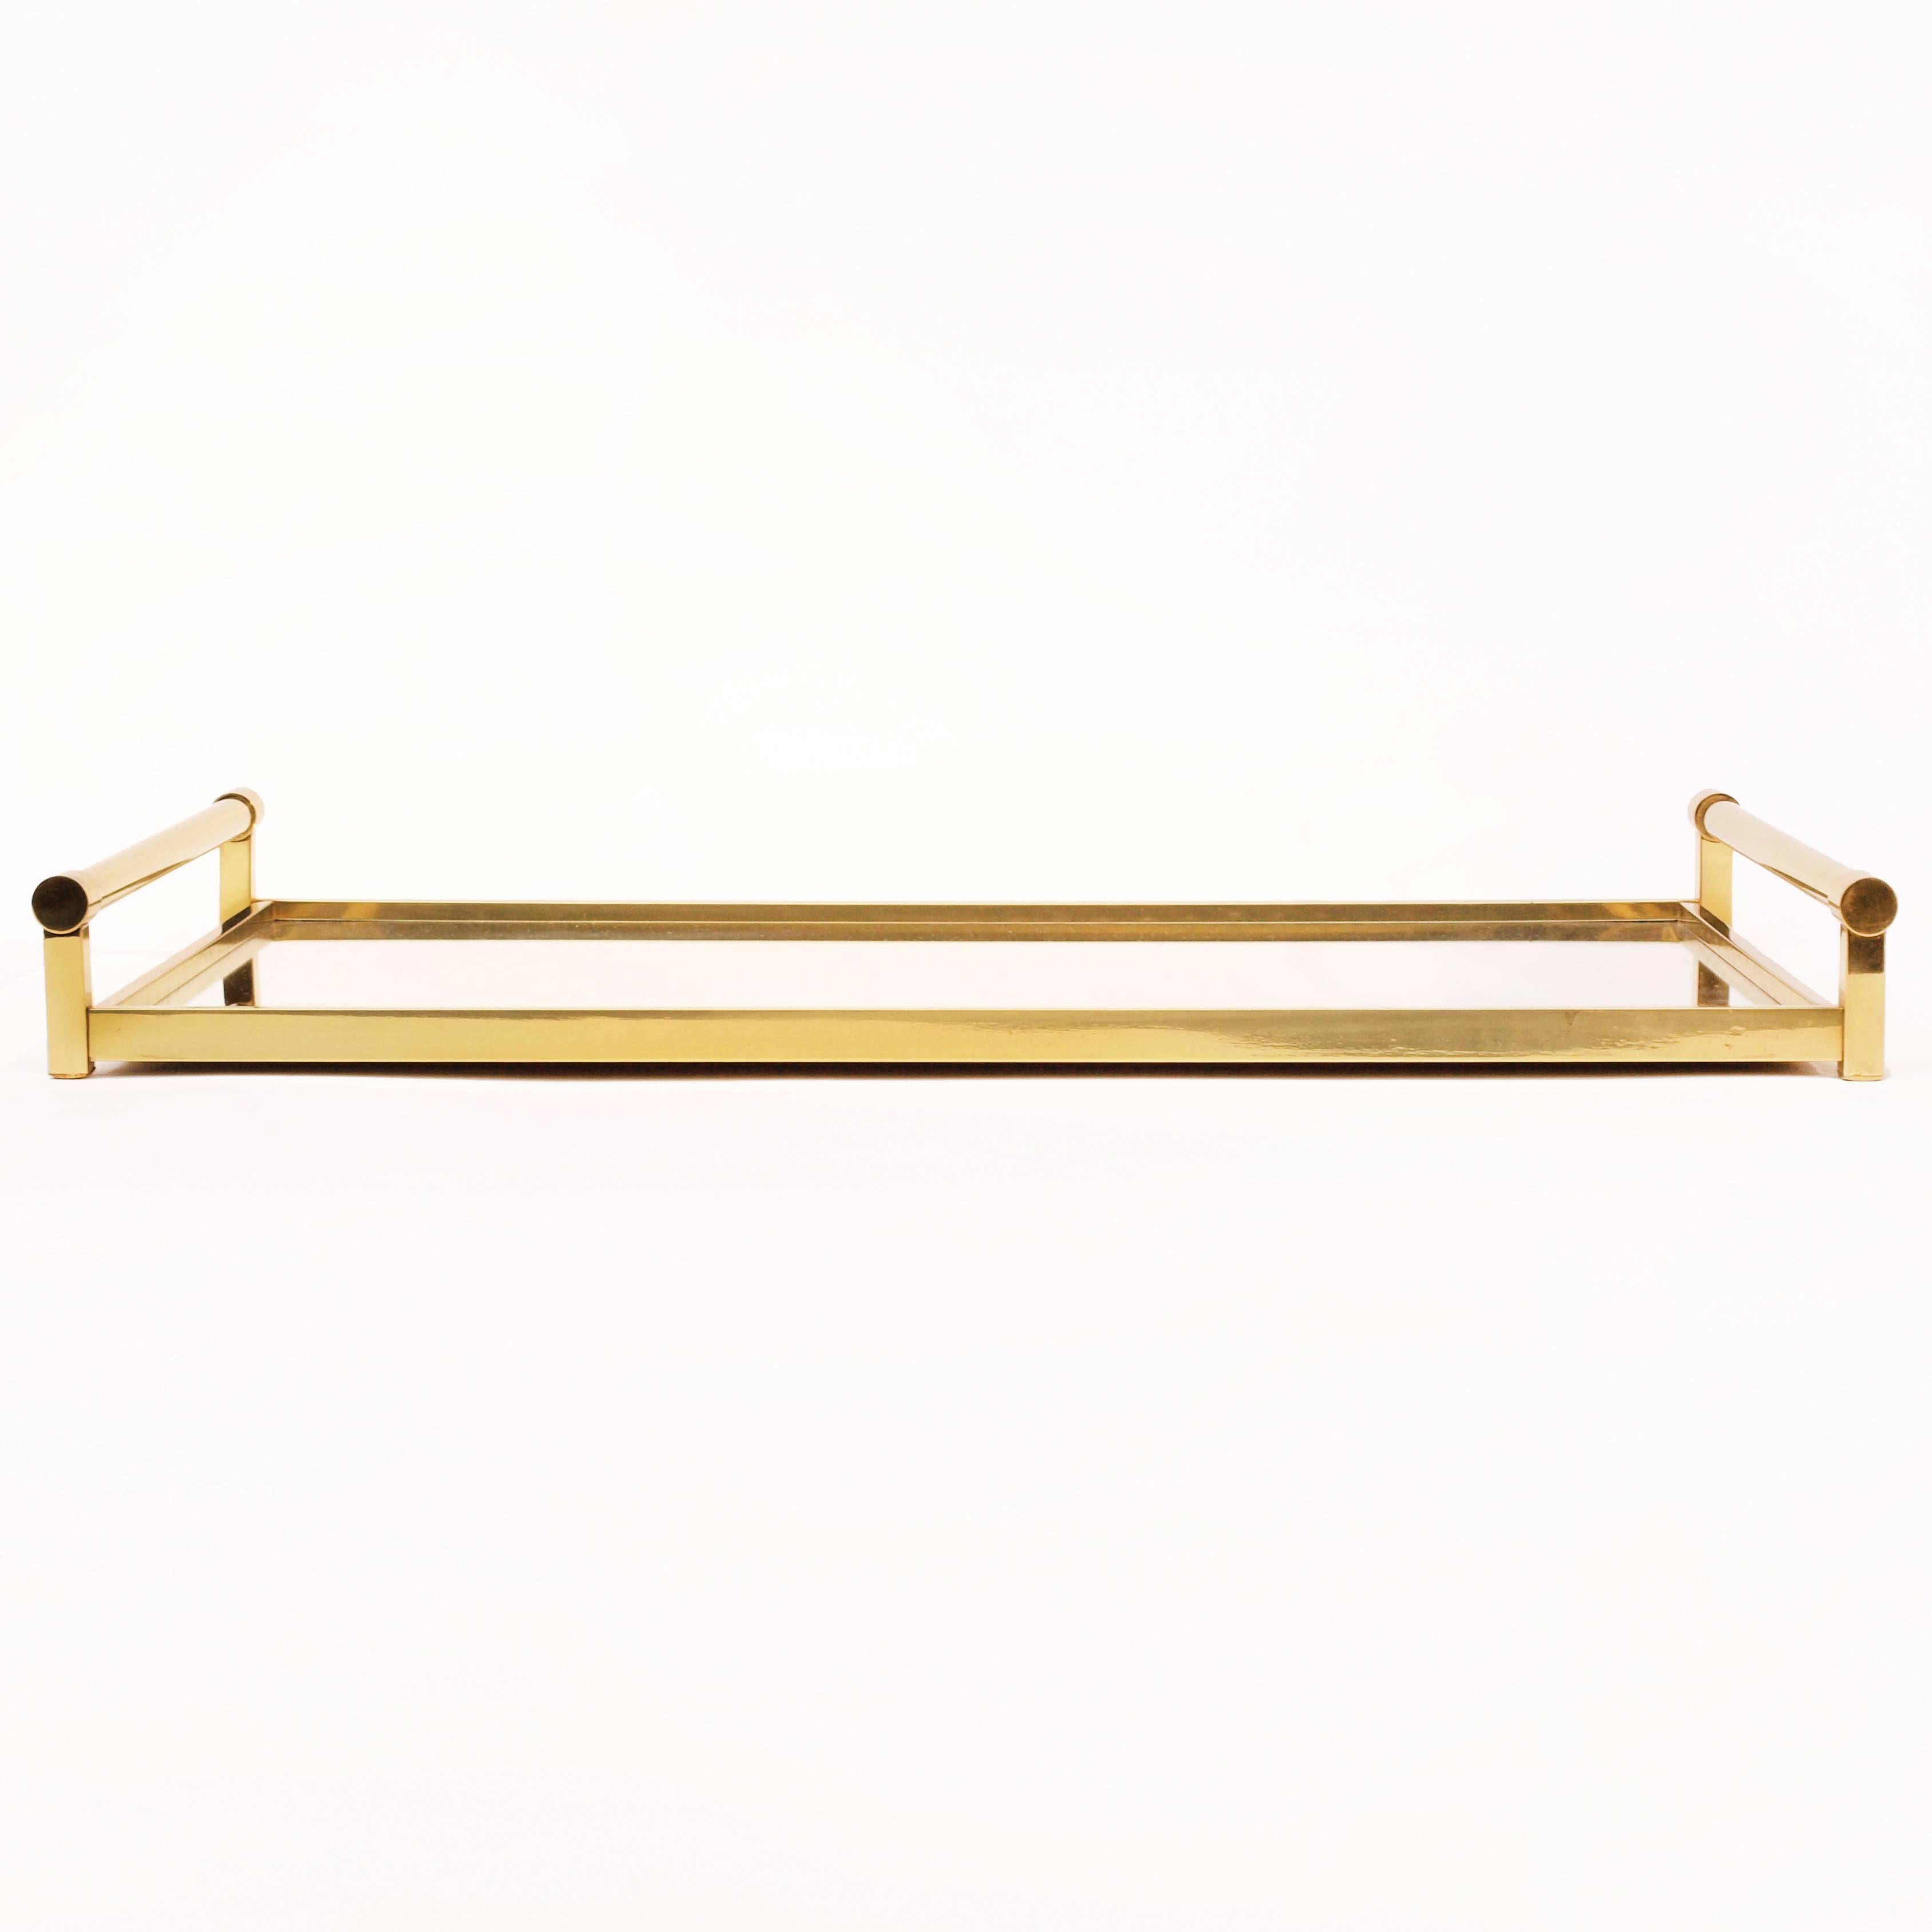 Mid-20th Century Very Large Brass Drinks Serving Tray by Jacques Adnet